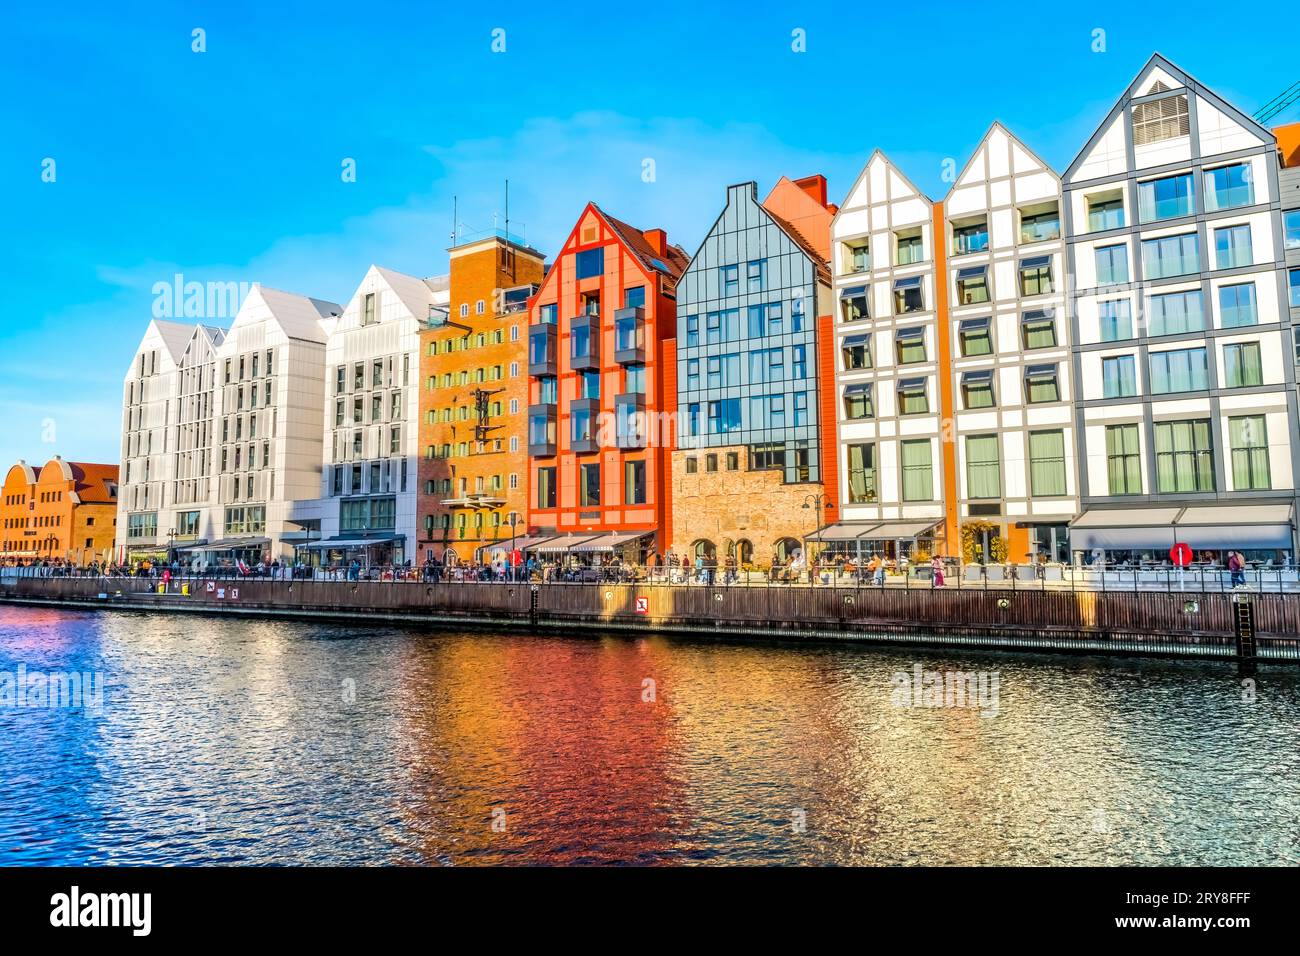 Colorful Inner Harbor Port Motlawa River Historic Old Town of Gdansk Poland. City formerly known as Danzig. Stock Photo